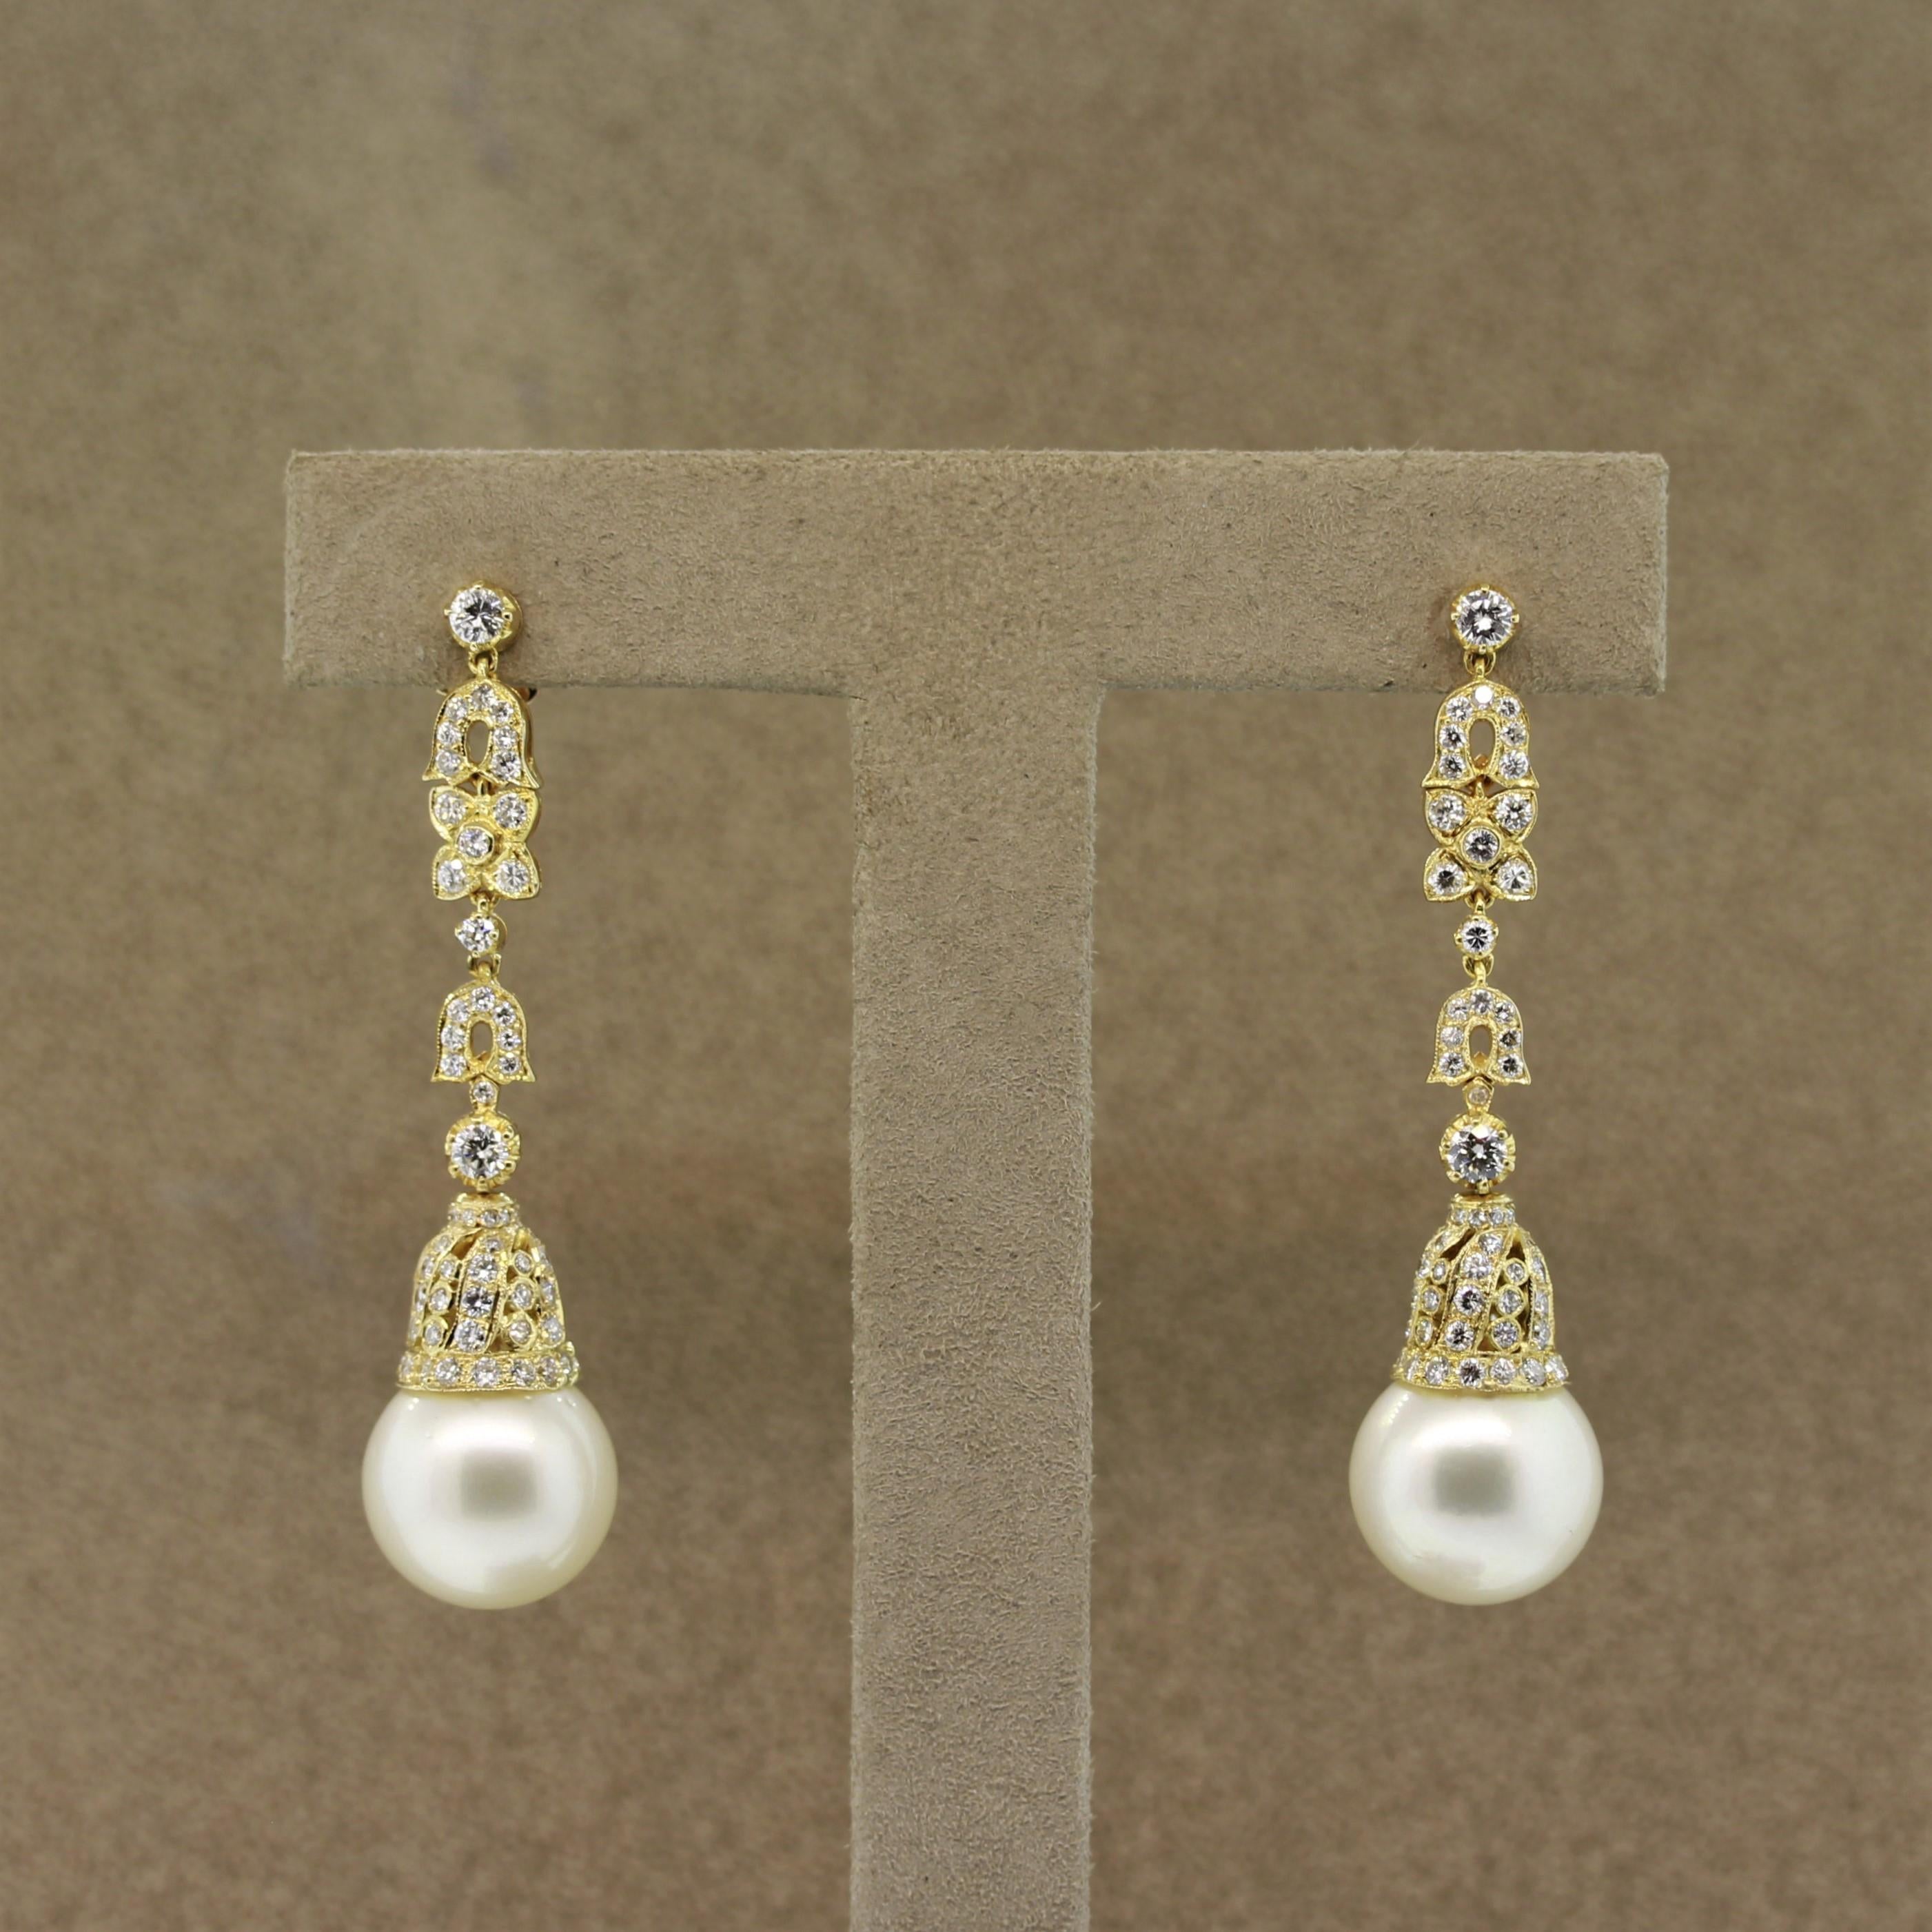 A stylish pair of earrings featuring 2 perfectly matching round South Sea pearls measuring 13mm each. They are accented by 2.46 carats of diamonds which run all along the drop portion of the earrings as well as around the setting of the pearls. Made